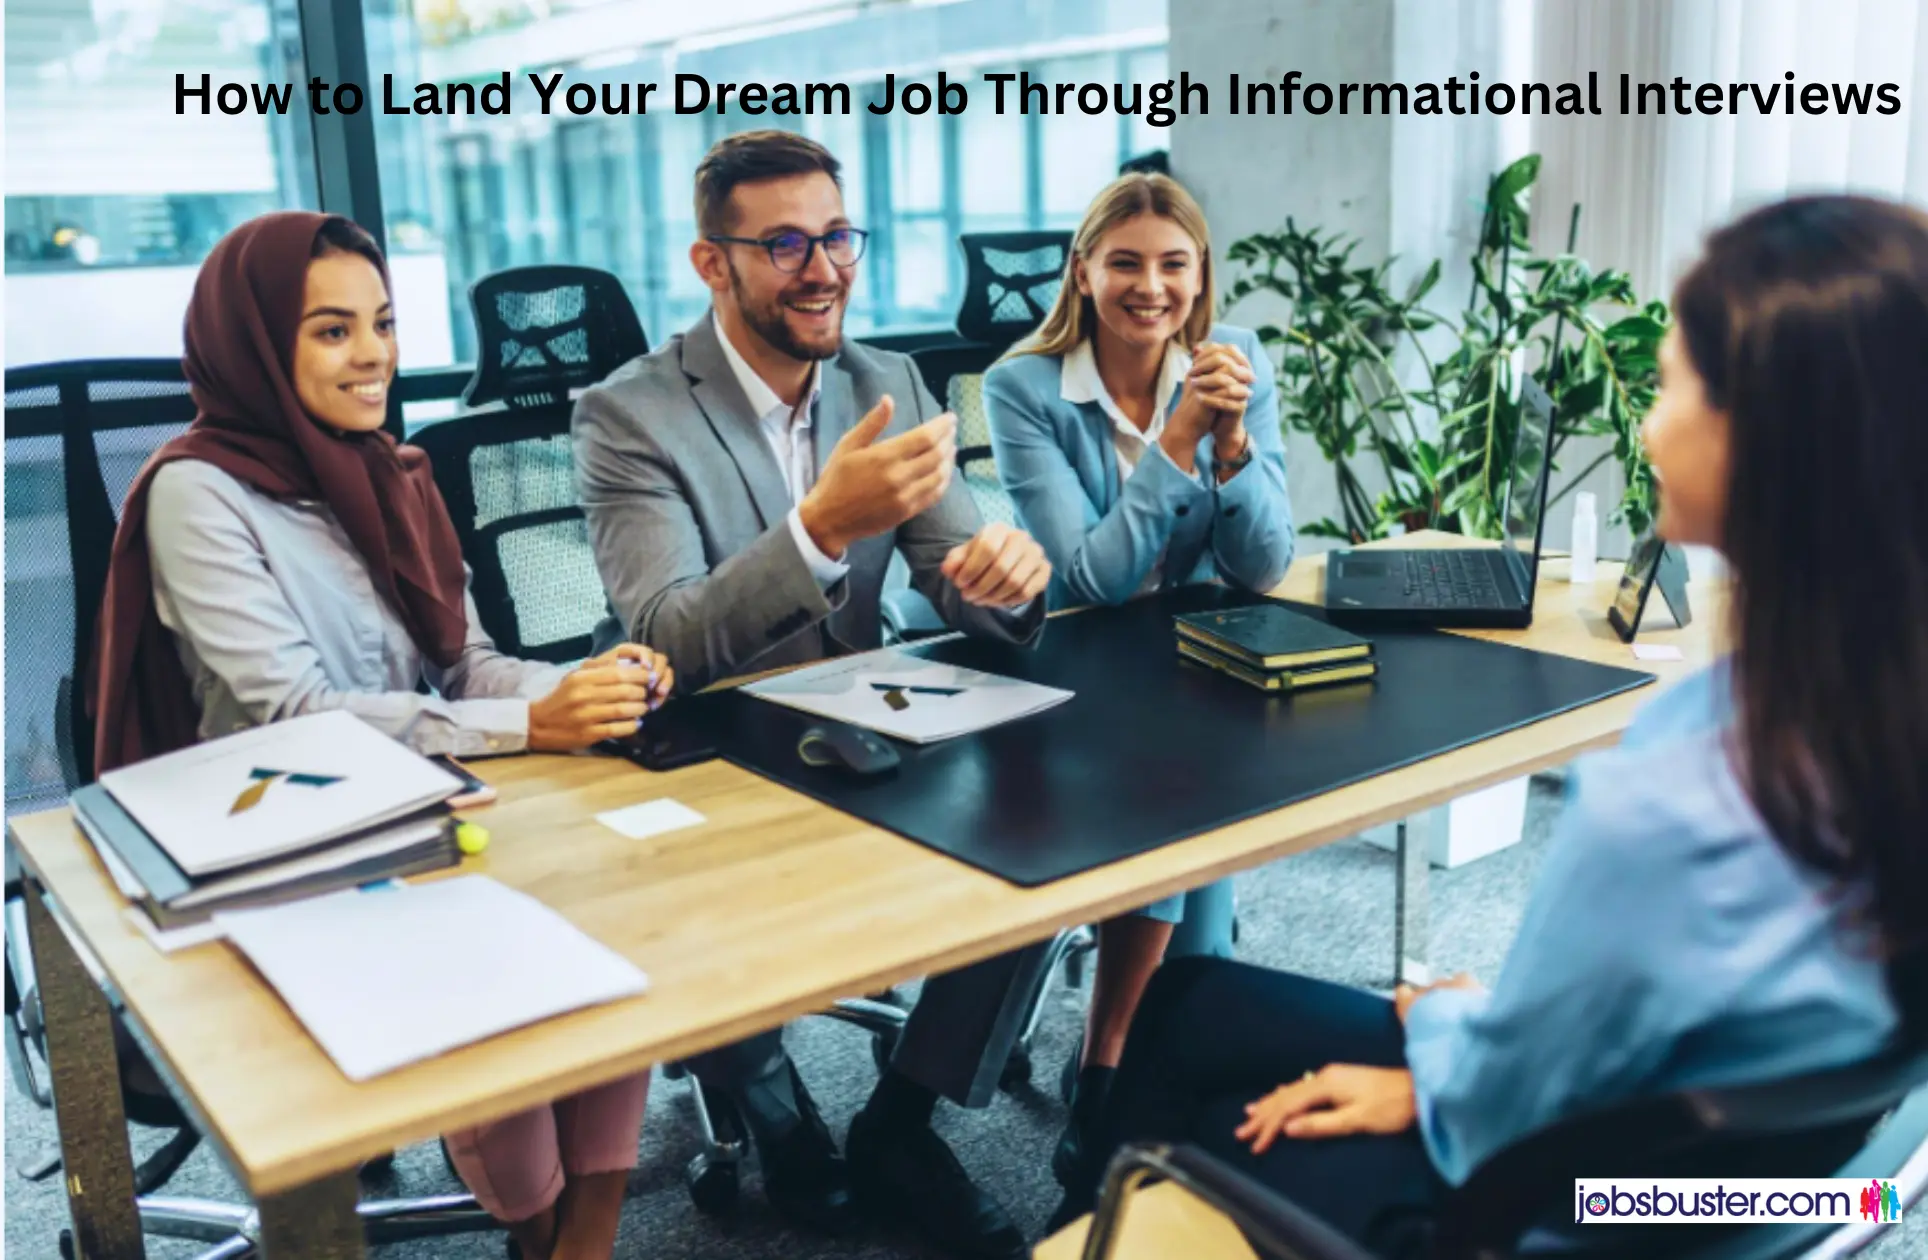 How to Land Your Dream Job Through Informational Interviews